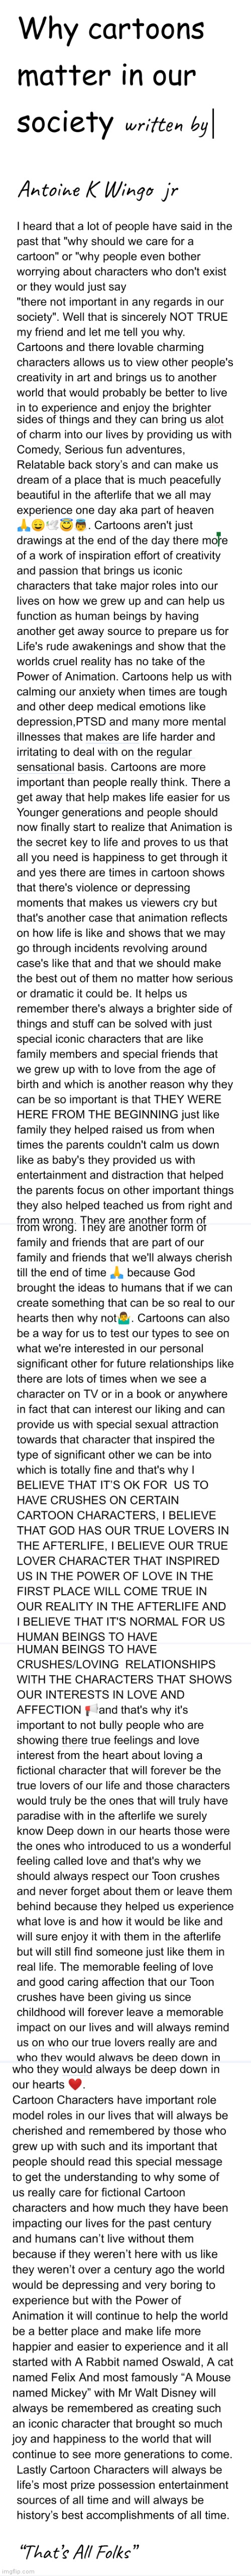 A message that everybody needs to hear. Why Cartoons are very important in our society | image tagged in cartoons are important,the reason why cartoons are important in our society,written by aj super star,the importance of cartoons | made w/ Imgflip meme maker